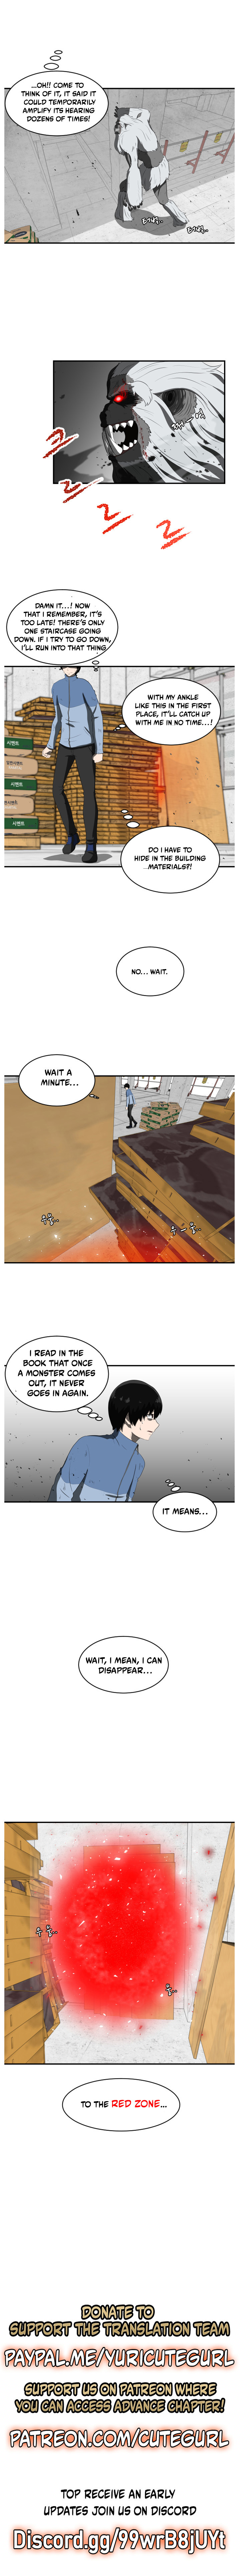 The Story of Bones and Ashes - Chapter 2 Page 20